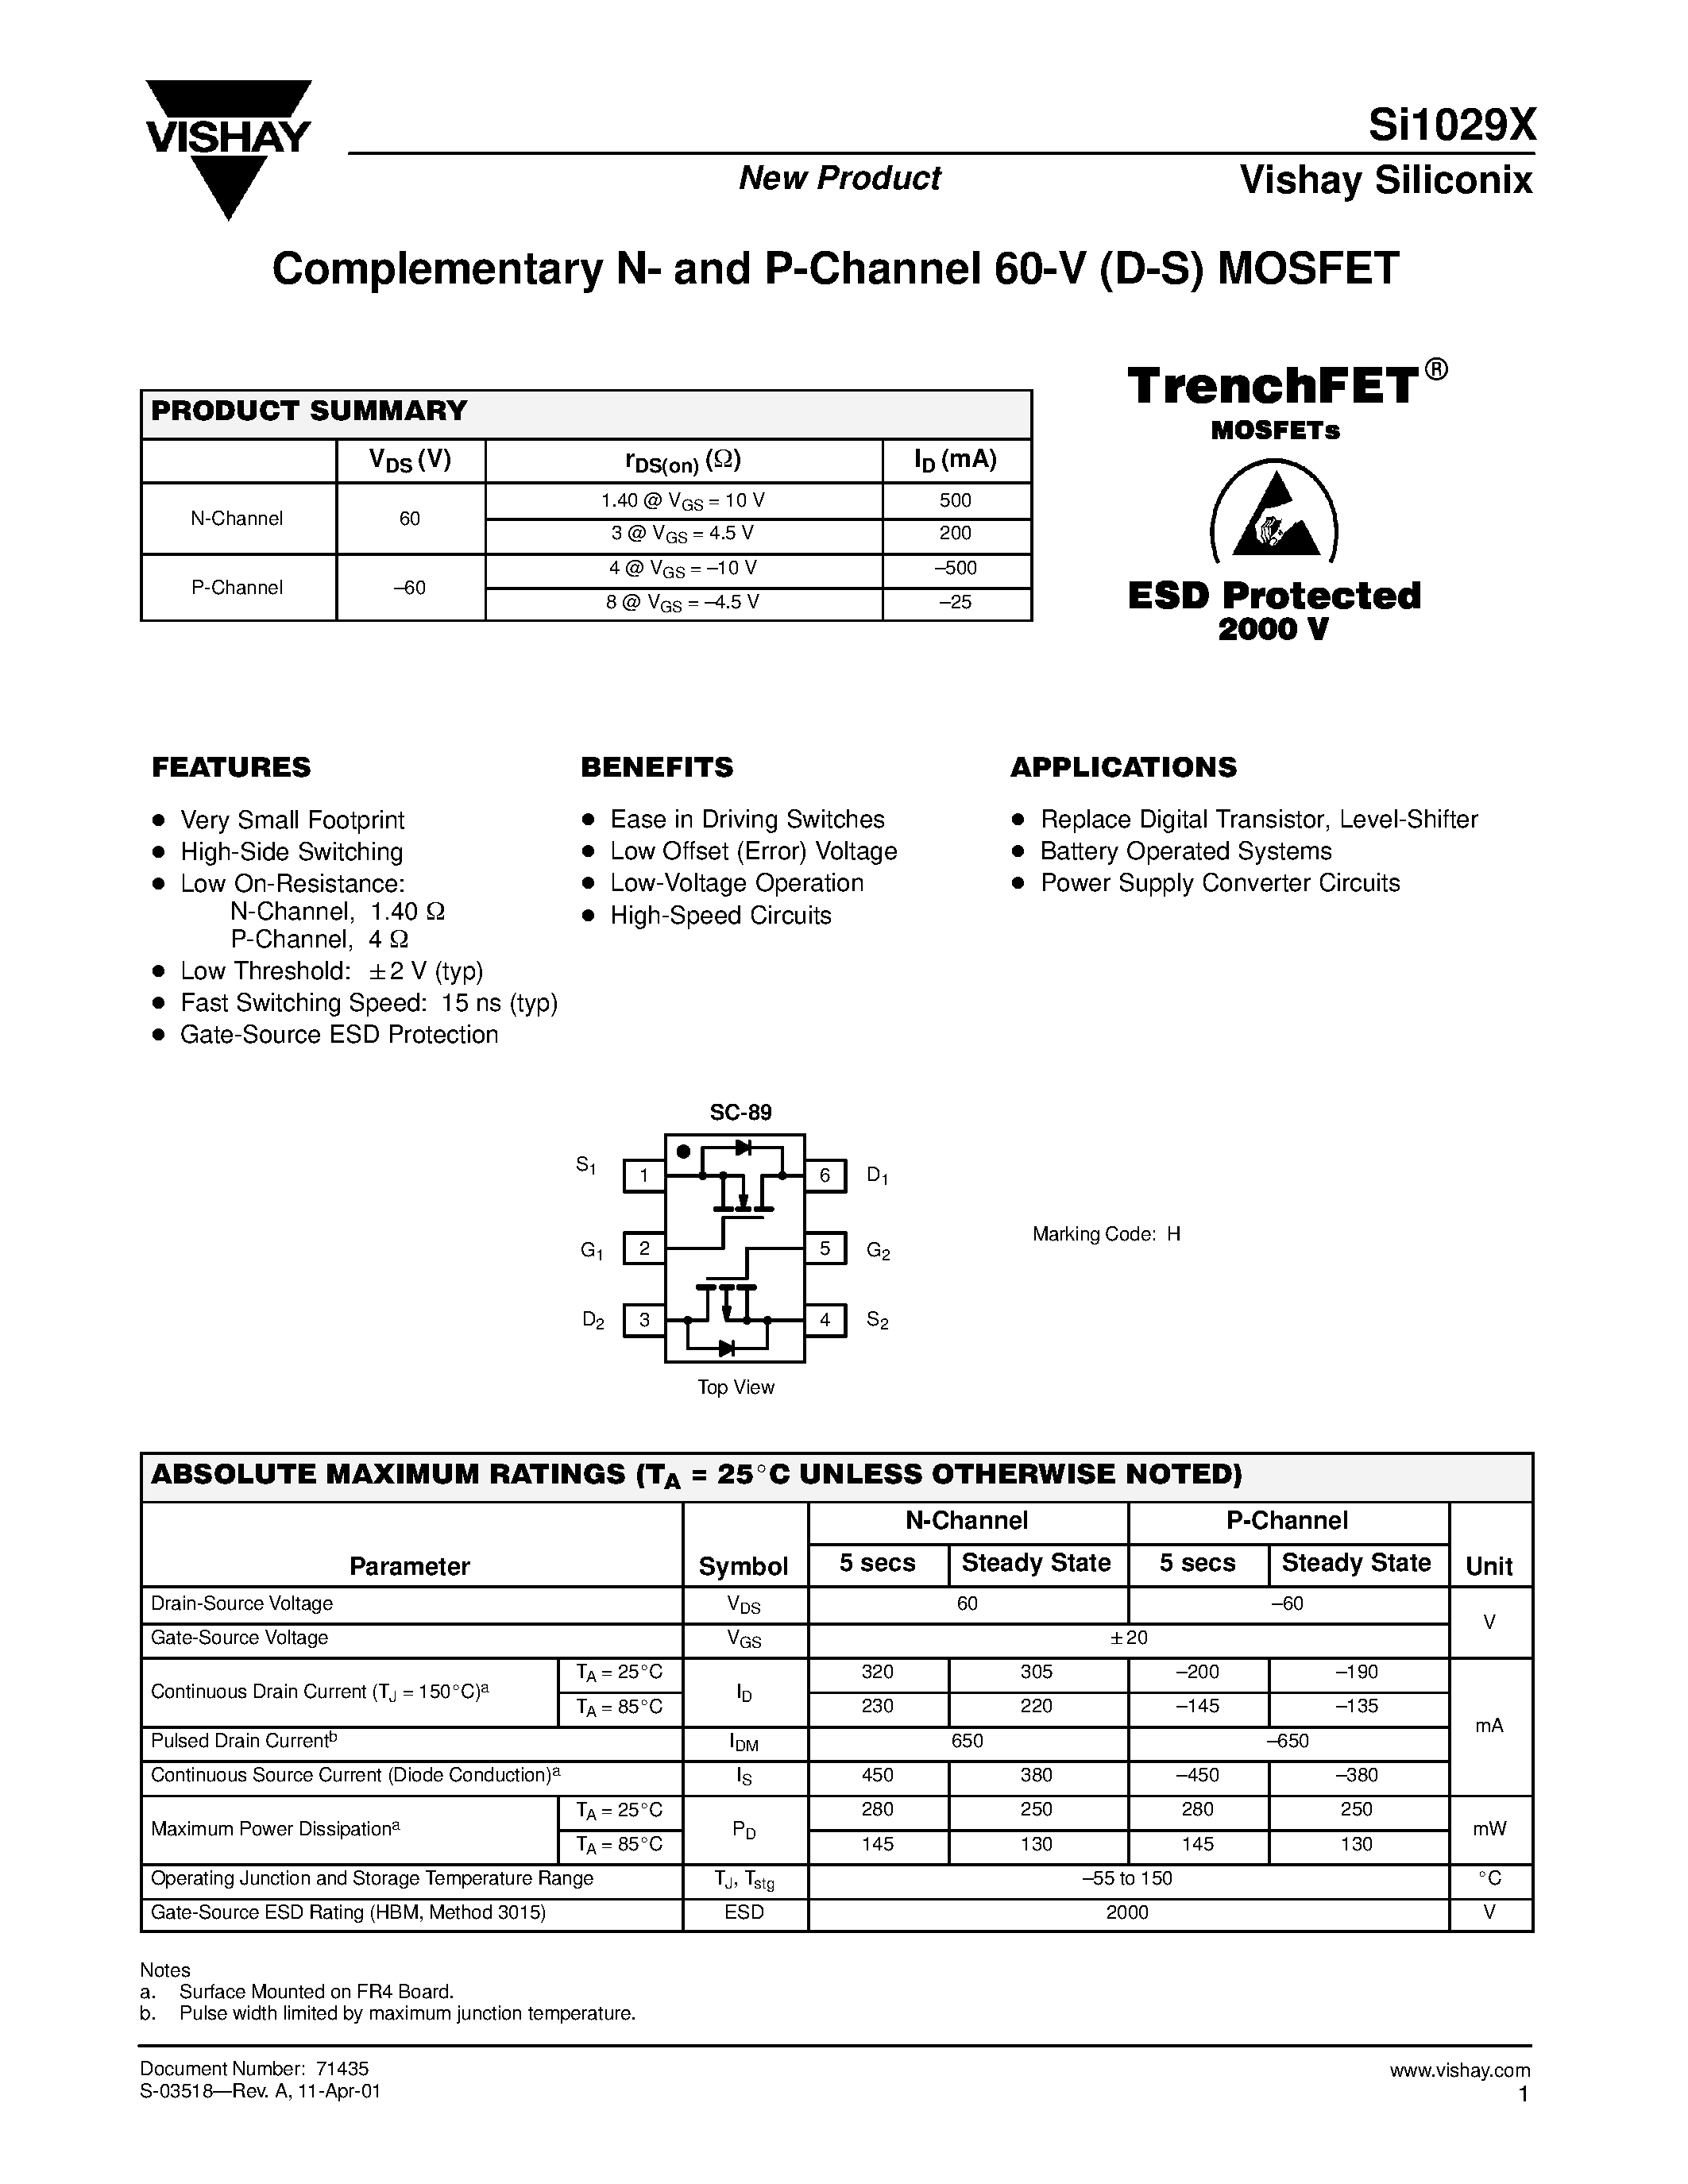 Даташит SI1029X - Complementary N- and P-Channel 60-V (D-S) MOSFET страница 1